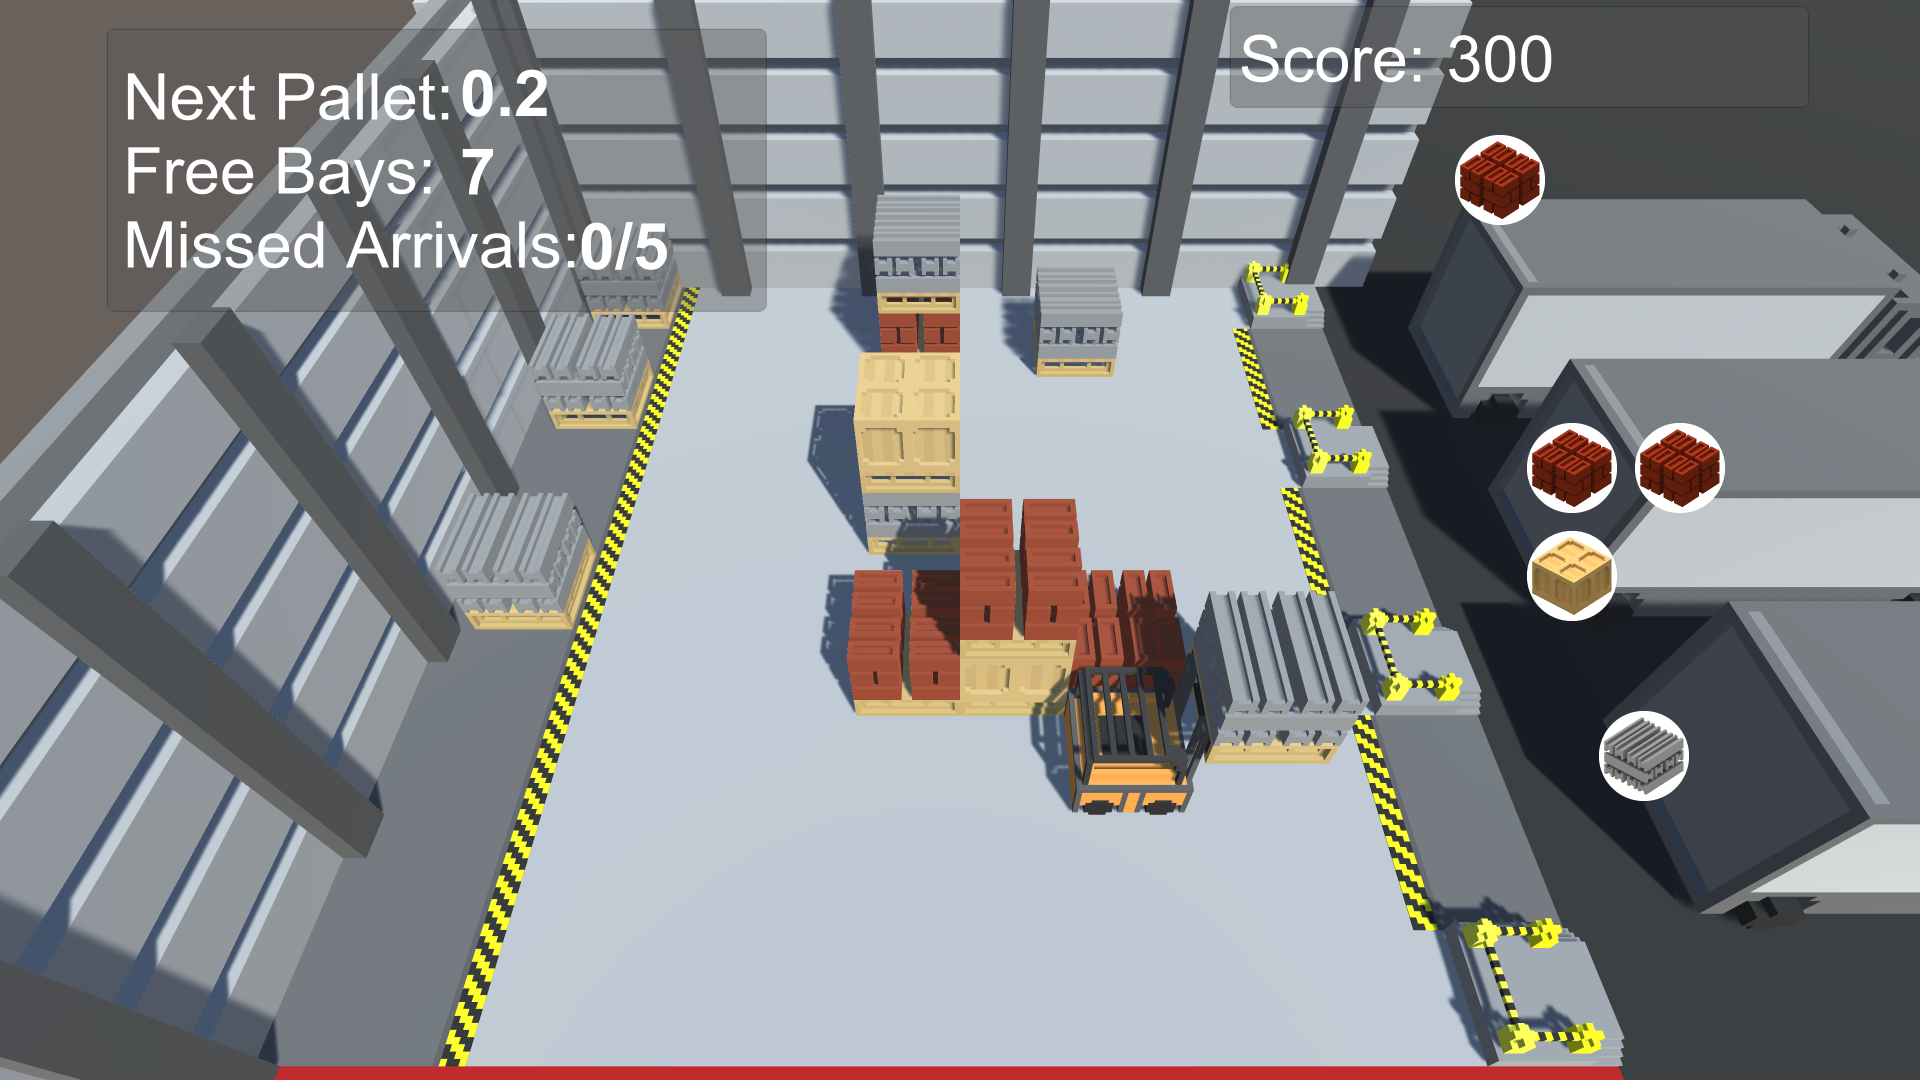 Forklift Frenzy by malith